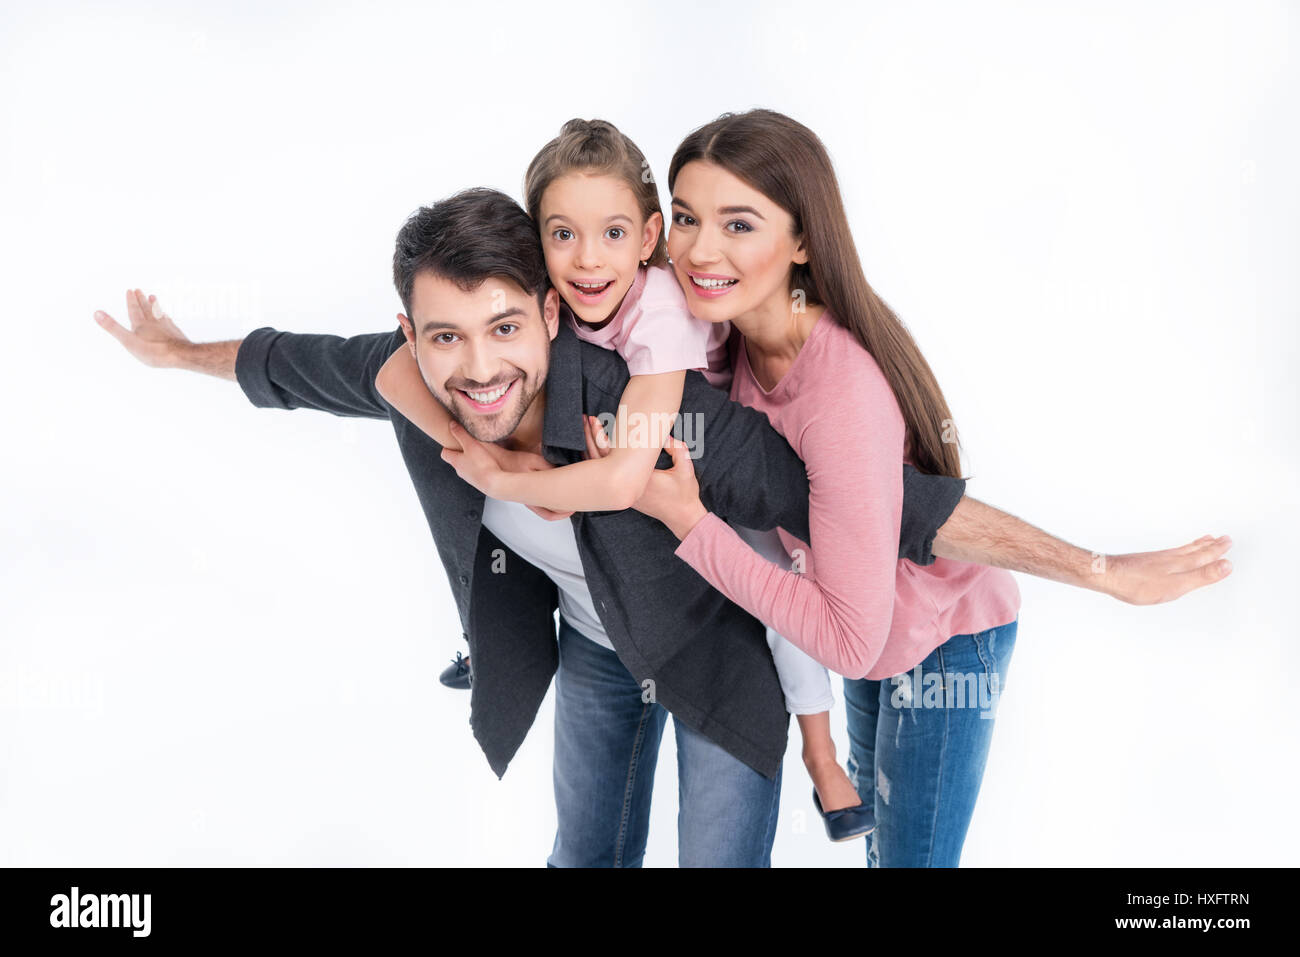 Happy young family with one child having fun together on white Stock Photo